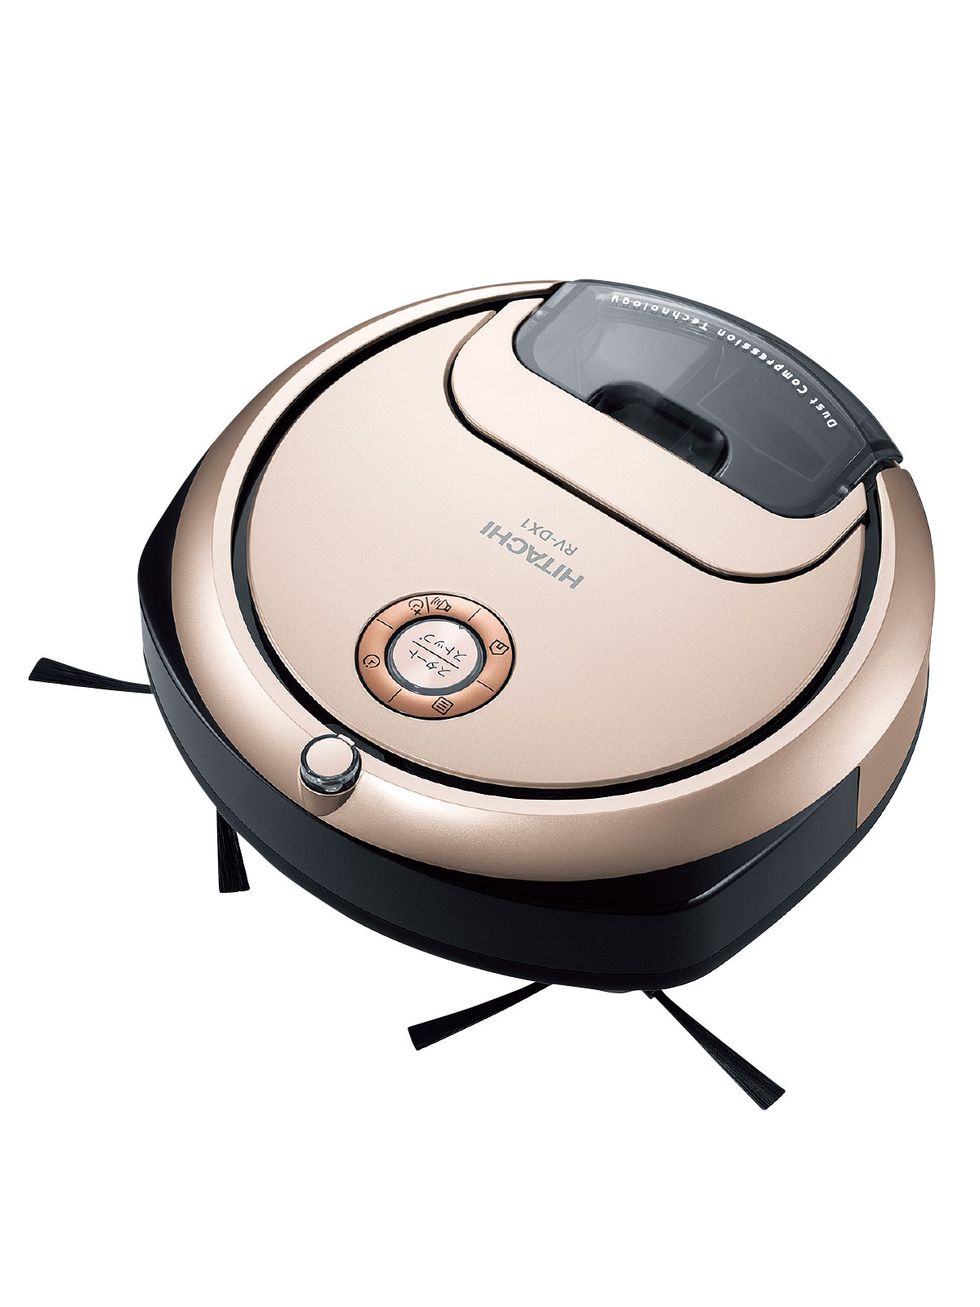 Home appliance, Small appliance, Technology, Rice cooker, Vacuum cleaner, 